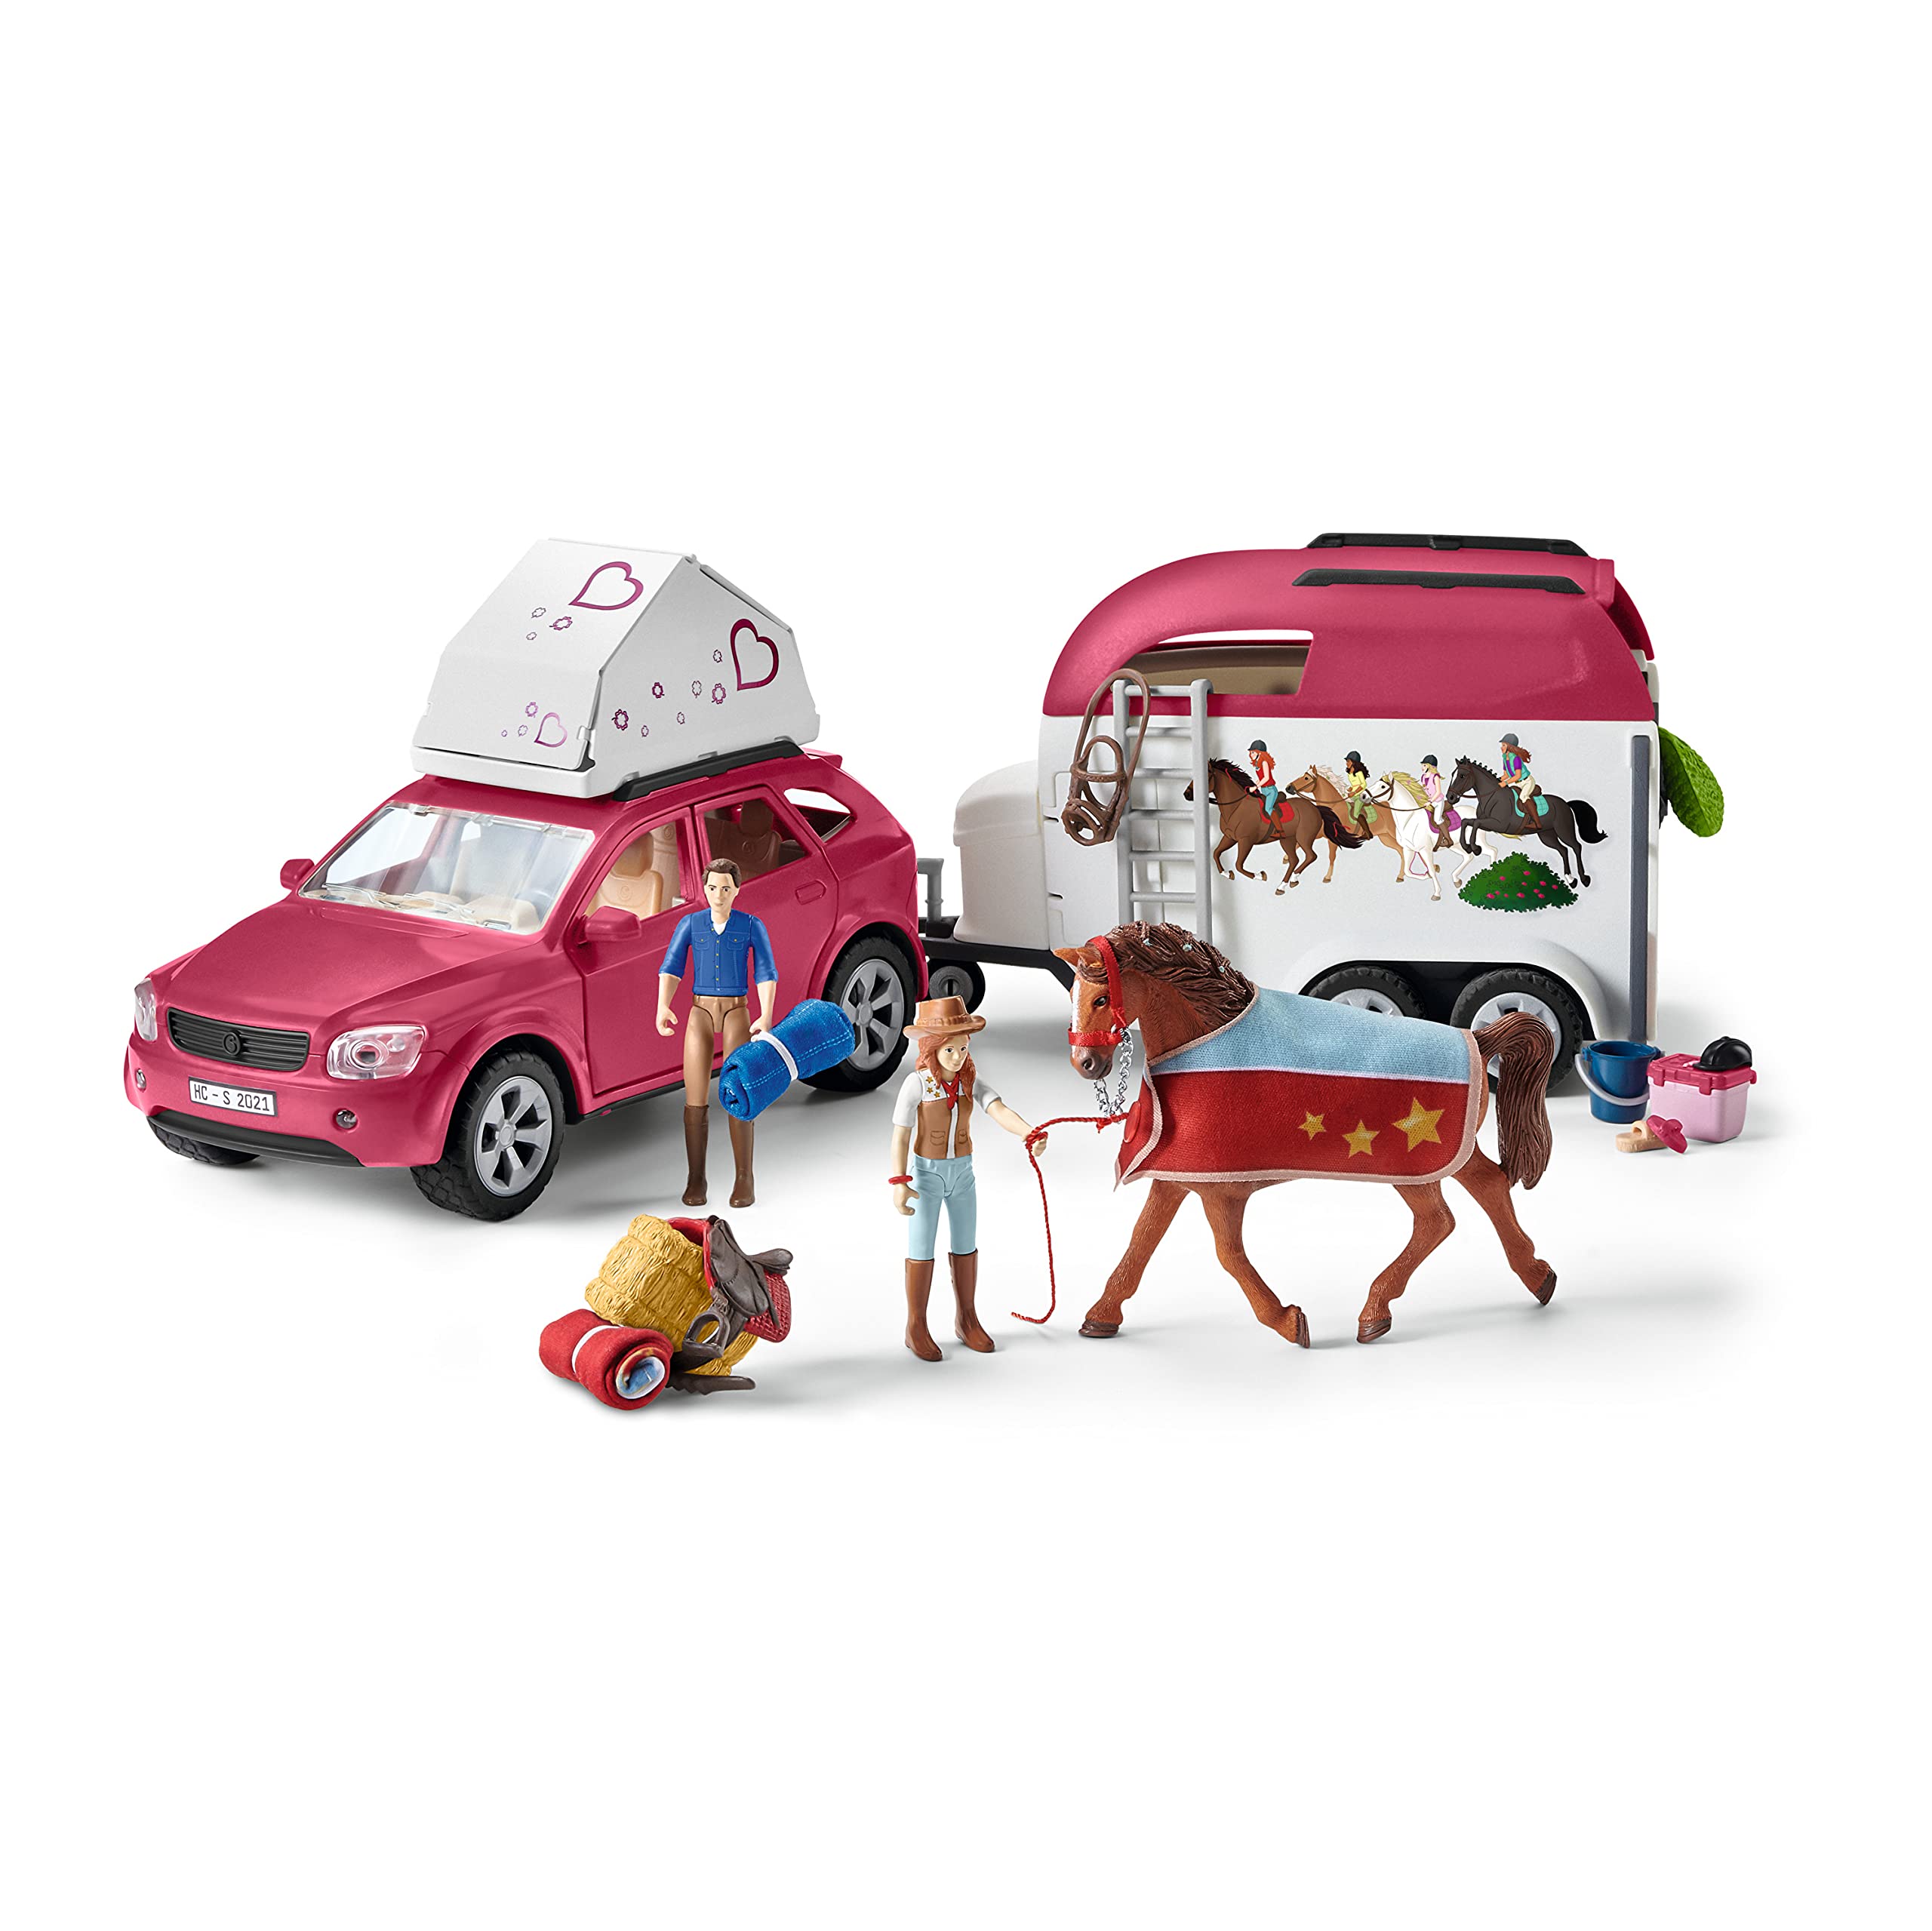 Schleich Horse Car and Trailer Toys - Multi Piece SUV & Trailer Playset, with Horse Figurine, Rider Action Figure, and Pony Accessories, for Girls and Boys Ages 5 and Above